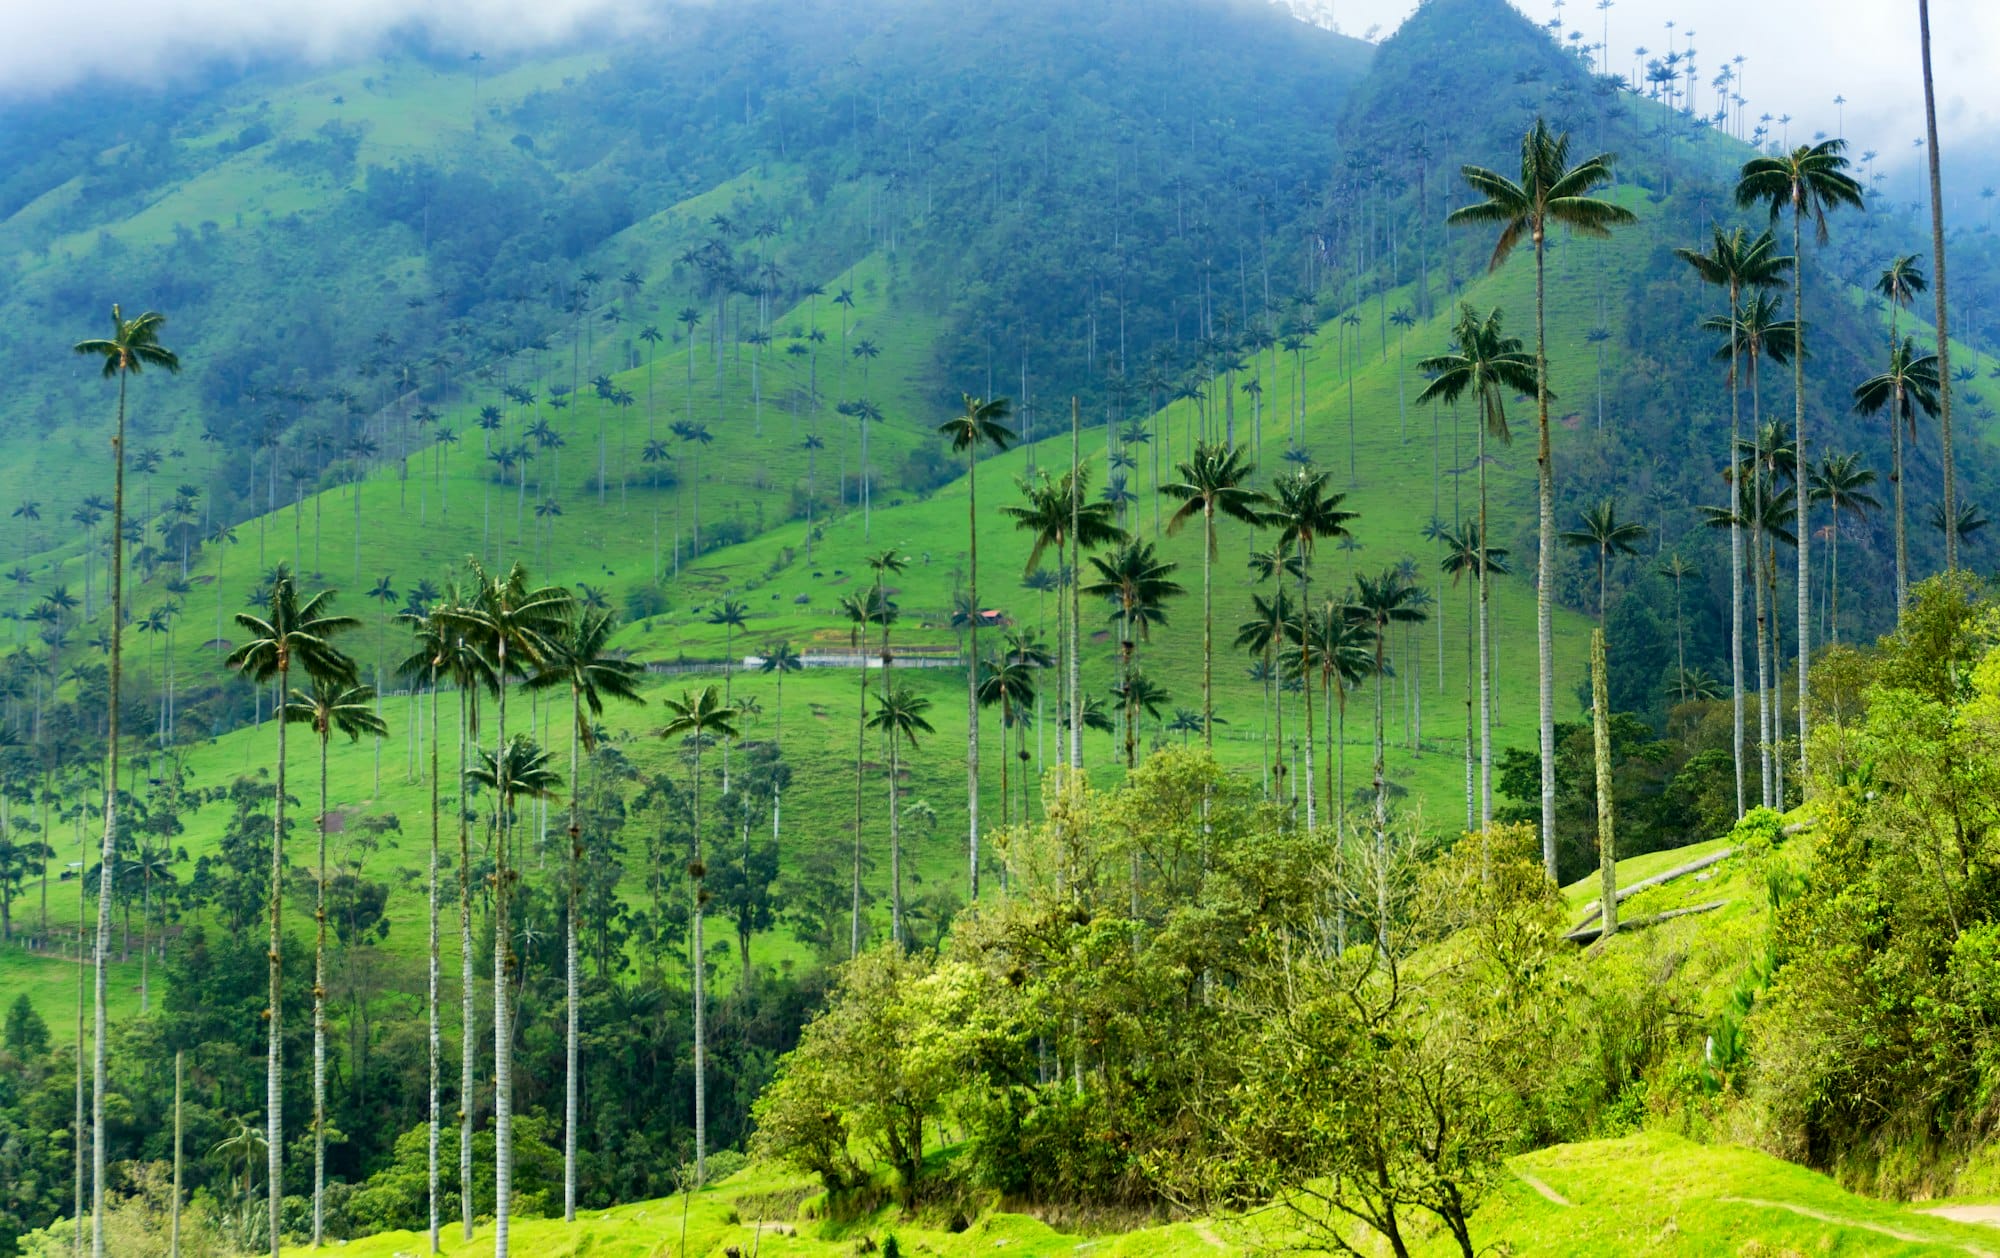 Cocora Valley Wax Palm Trees